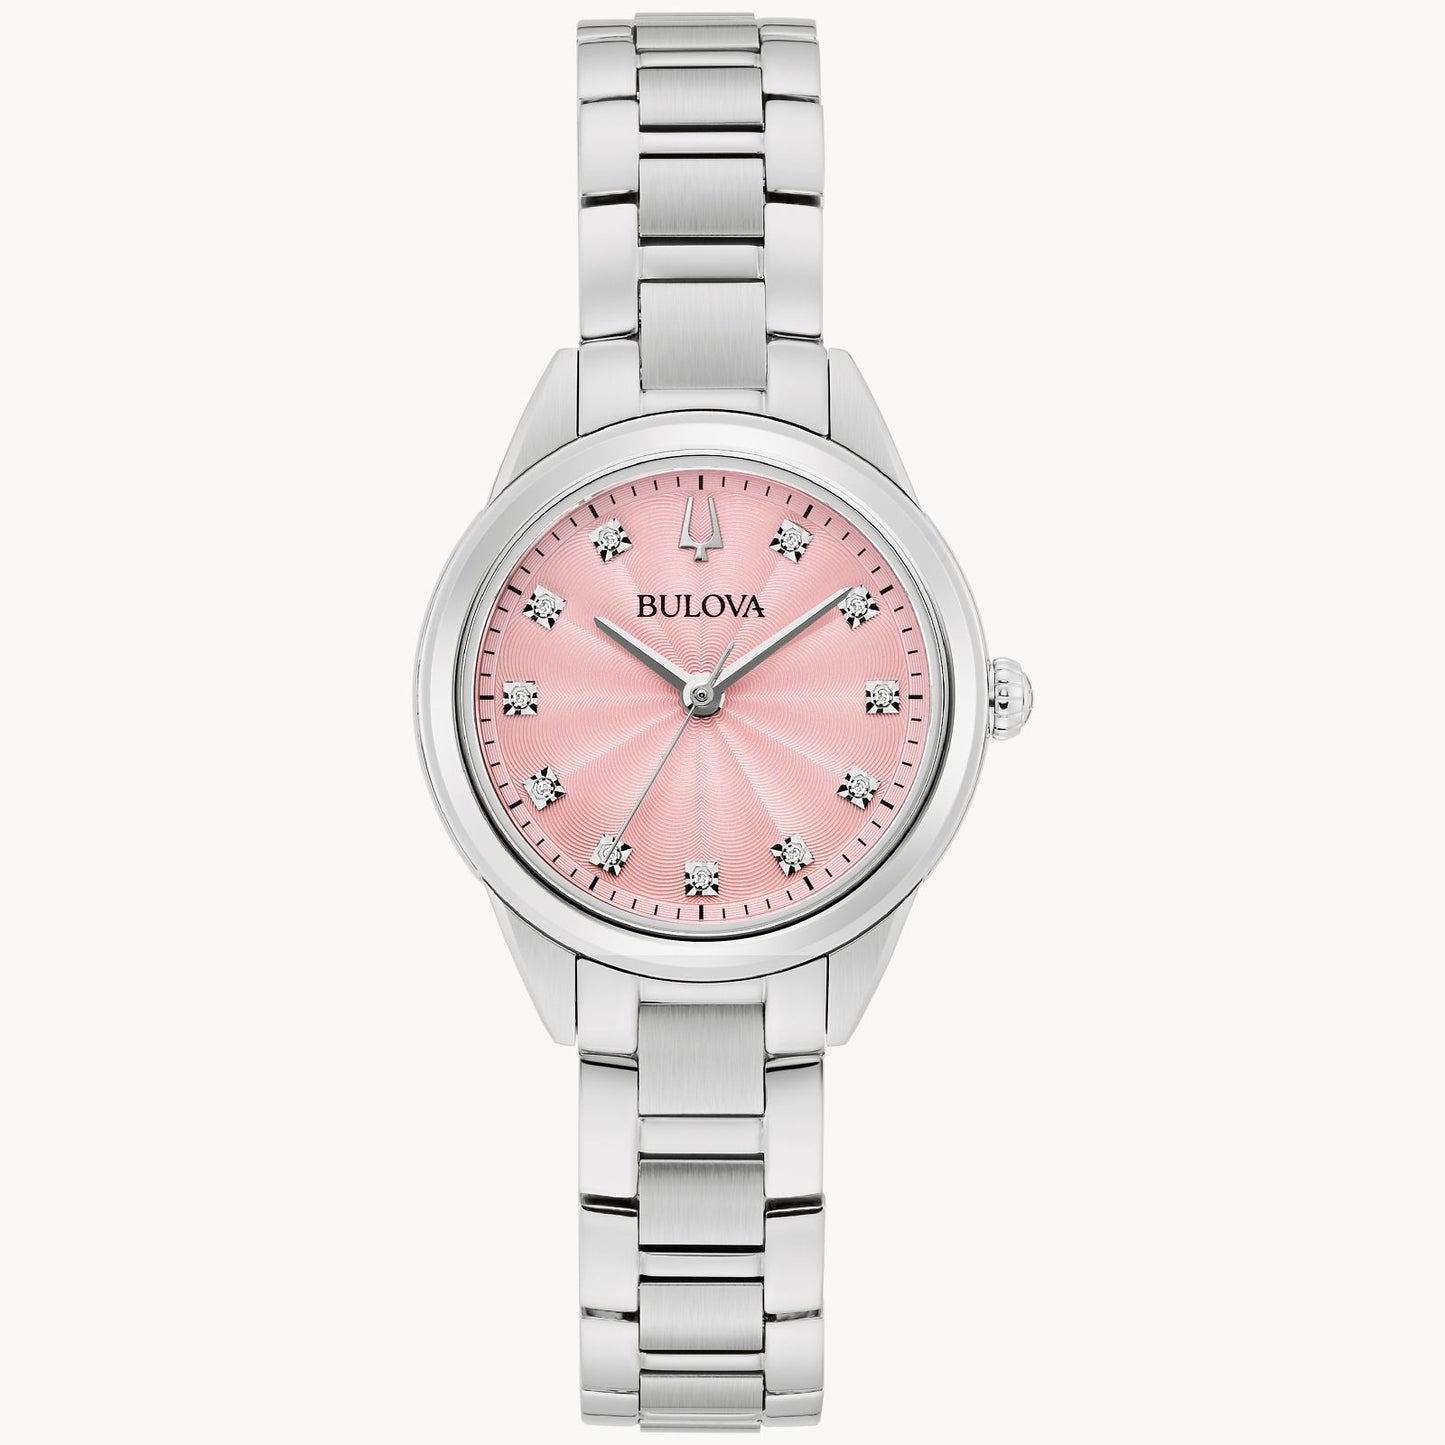 Bulova Women's Stainless Steel Bracelet Watch with Vibrant Pink Dial